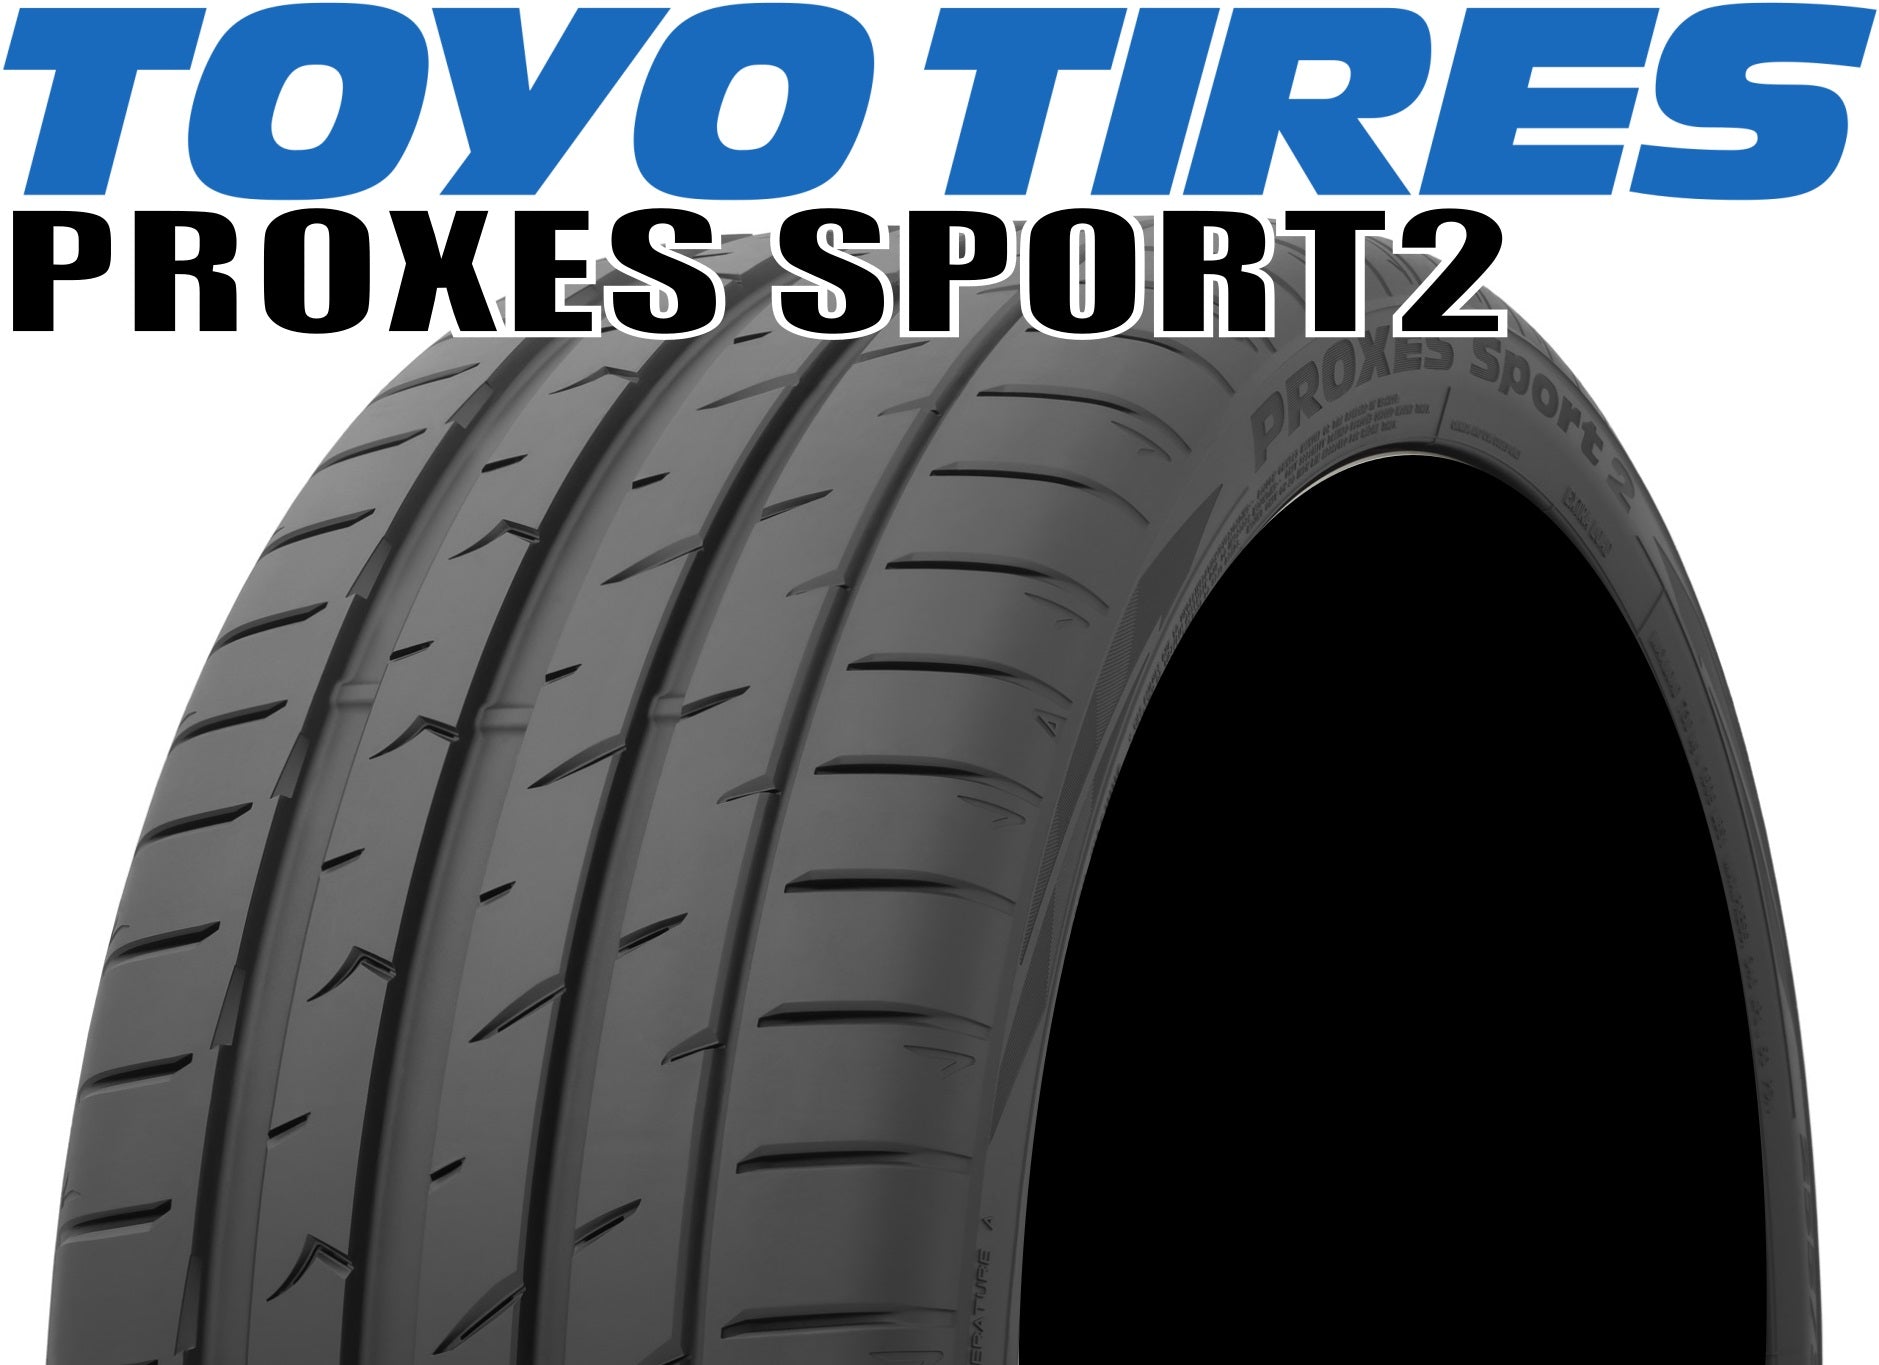 TOYO TIRES PROXES SPORT2(トーヨー プロクセススポーツ) 255/50R20 109Y 255/50-20 –  ハマガレネットストア